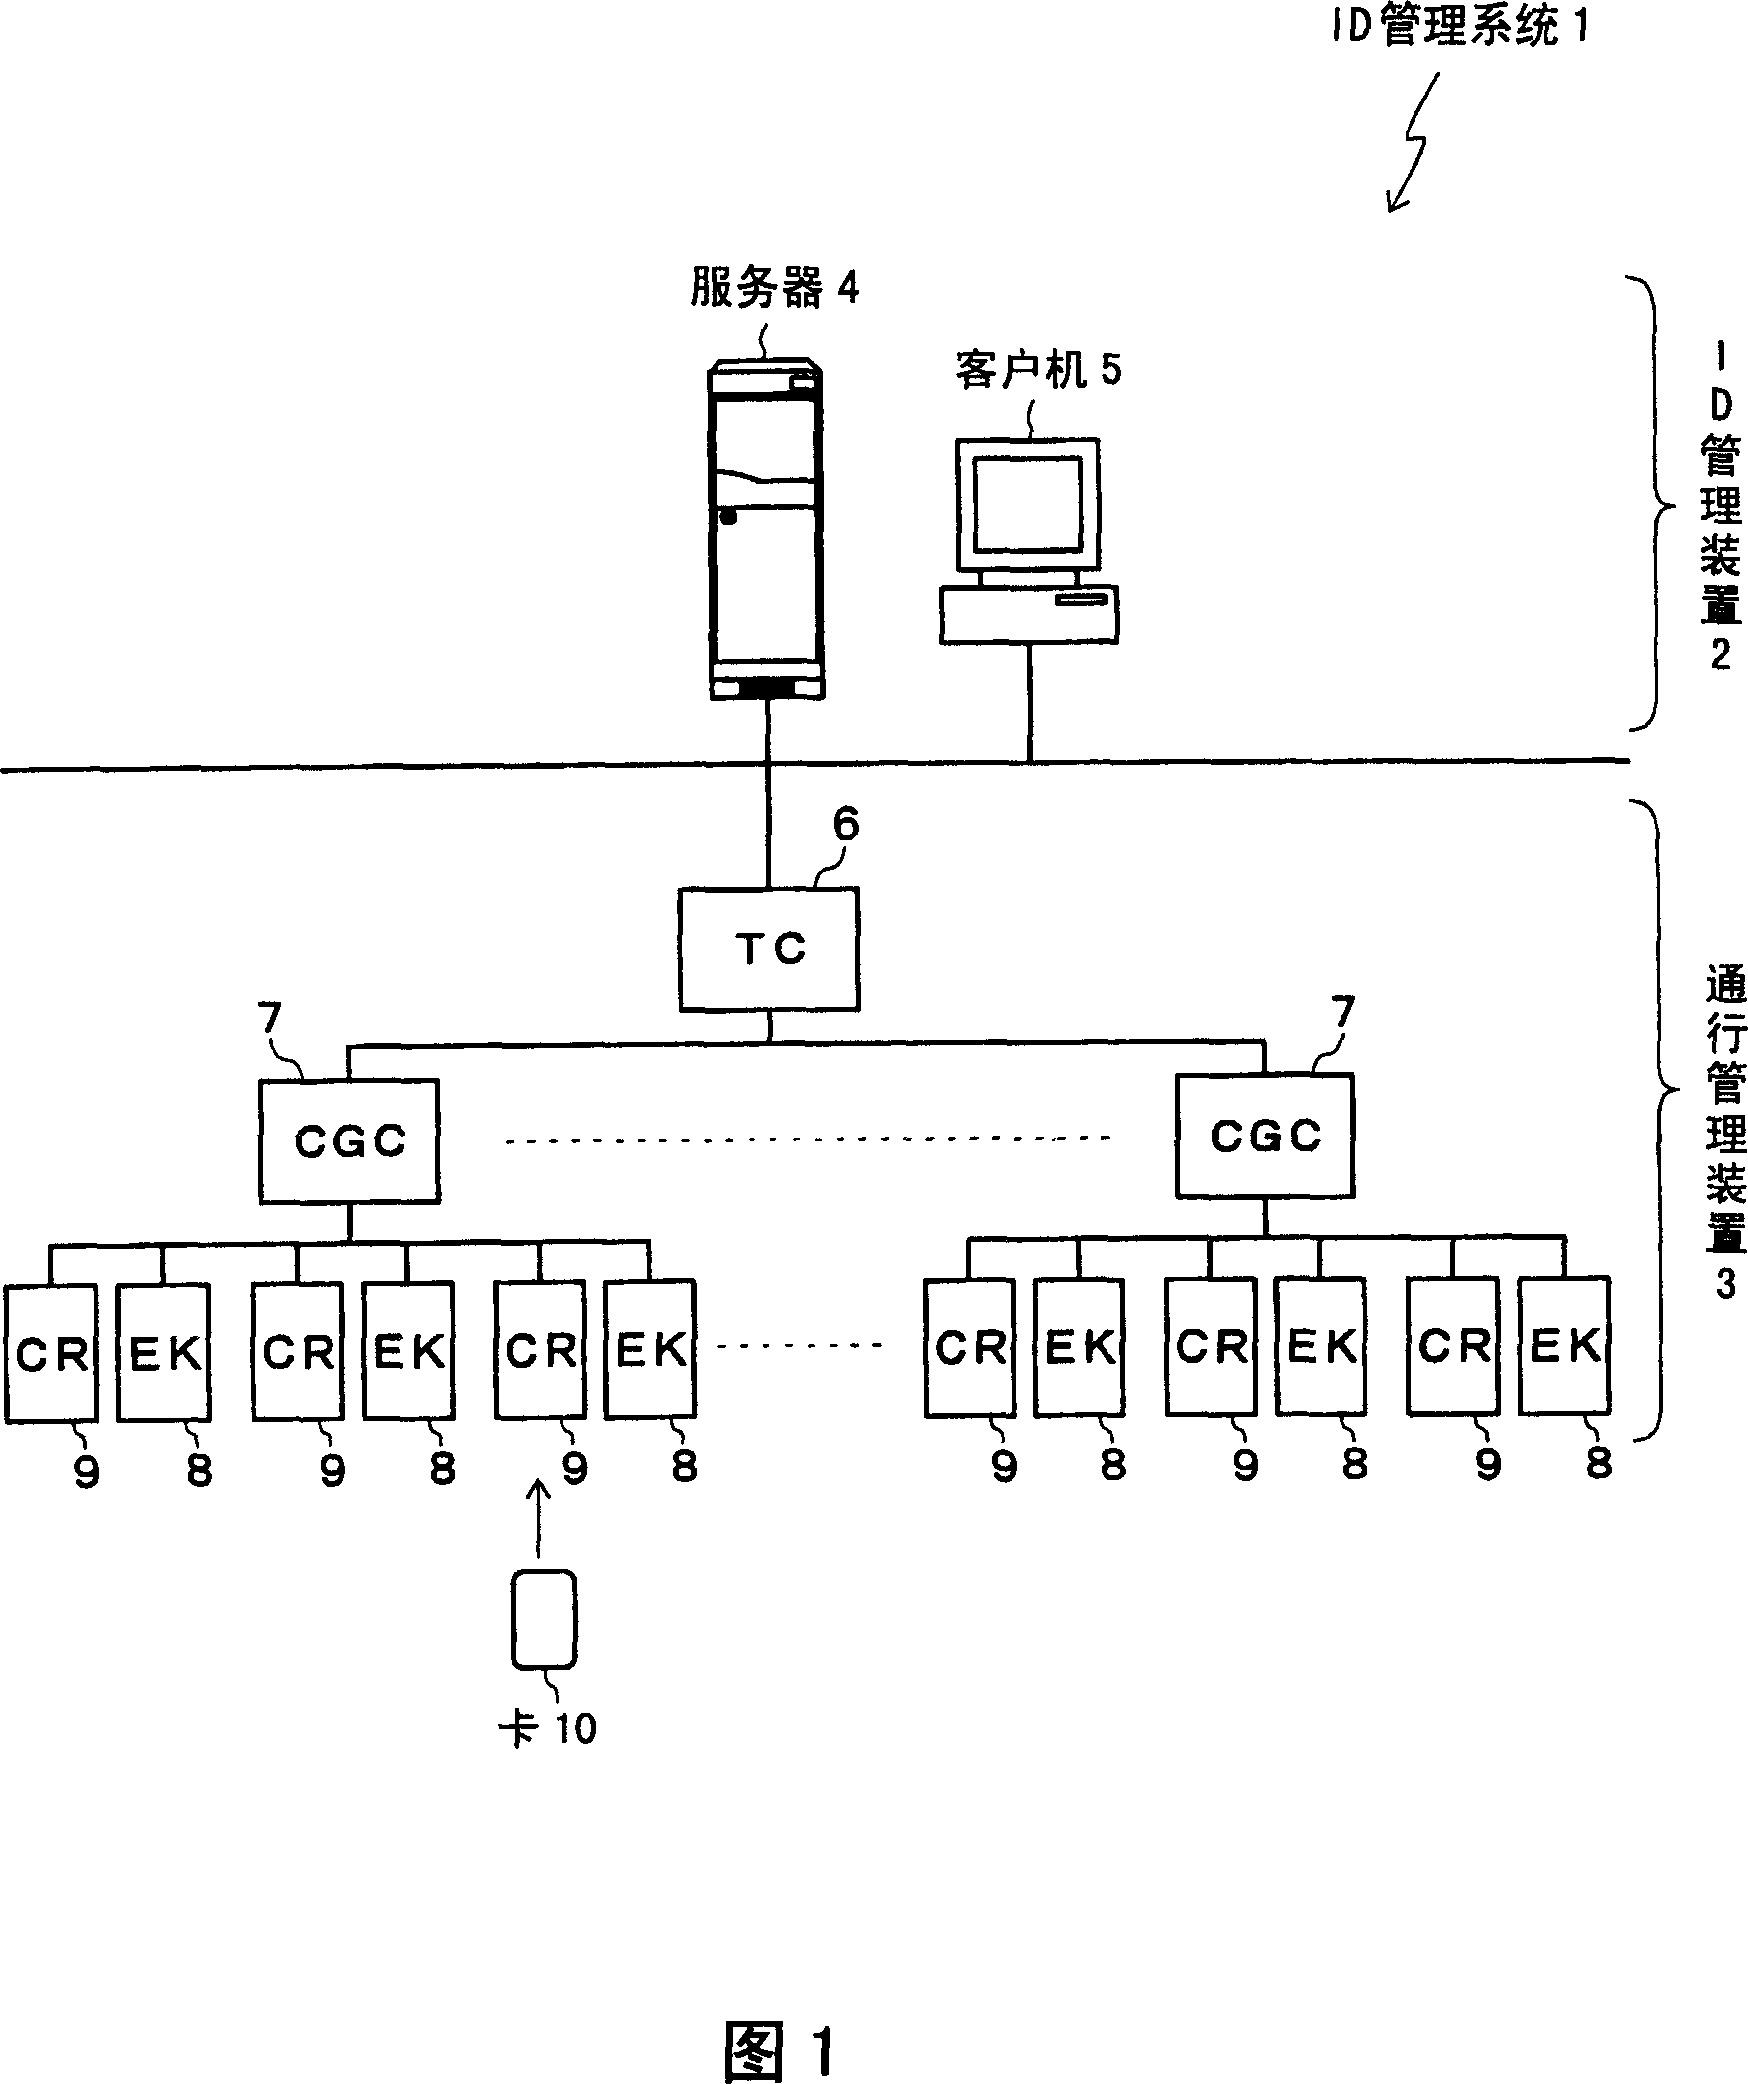 ID management device, ID management system and ID management method